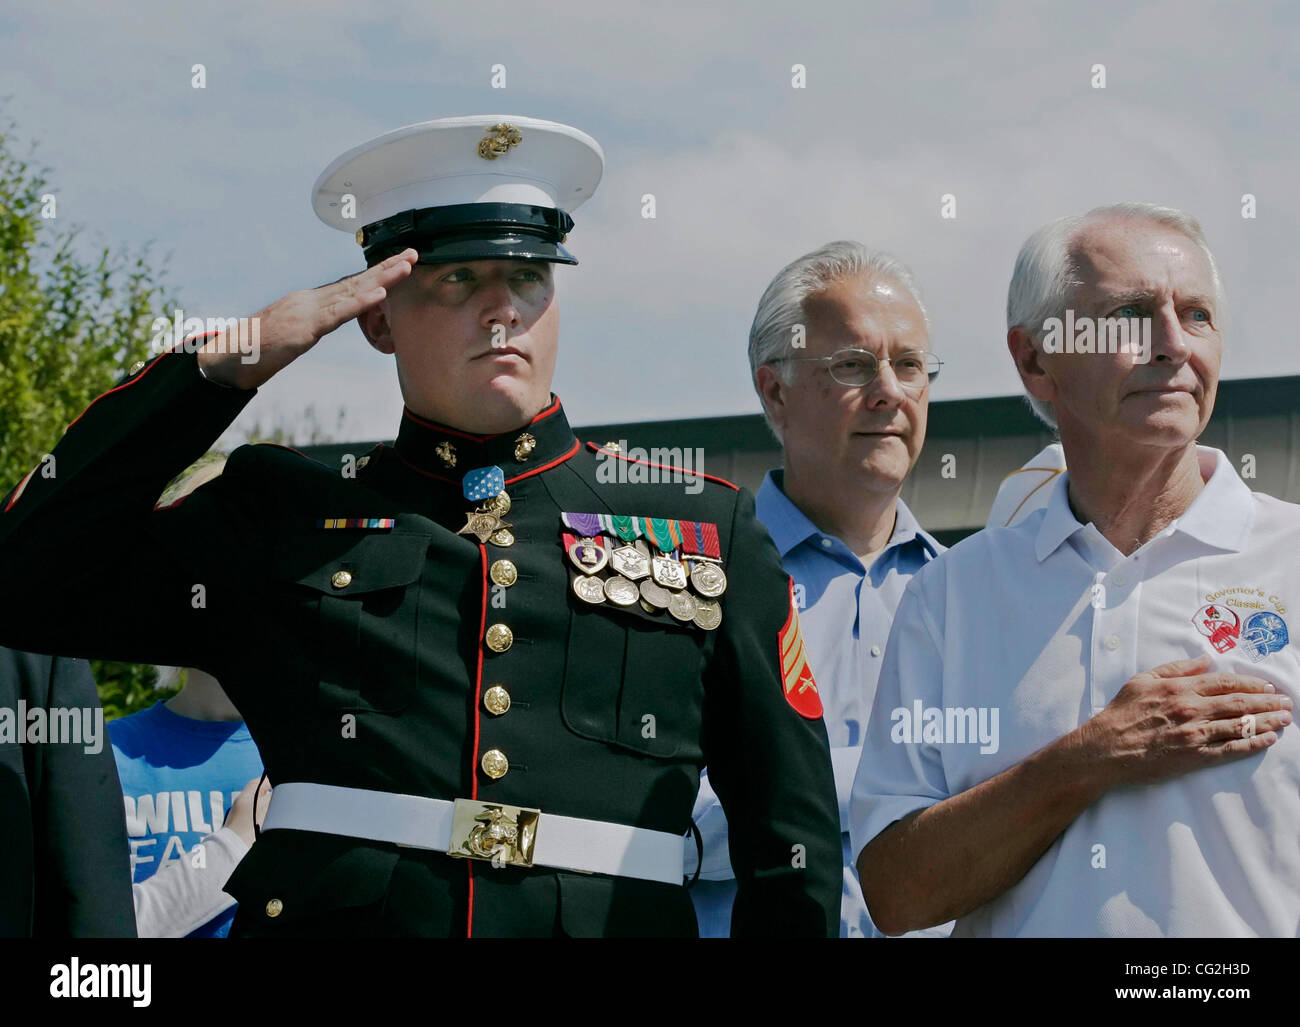 Local Medal of Honor recipient Marine Corps Reserve Sergeant DAKOTA MEYER (left) stands at attention saluting alongside state Senate President DAVID WILLIAMS (center) and Governor STEVE BESHEAR as the national anthem is played during a parade opening the 38th annual Cow Days festival. The event was  Stock Photo